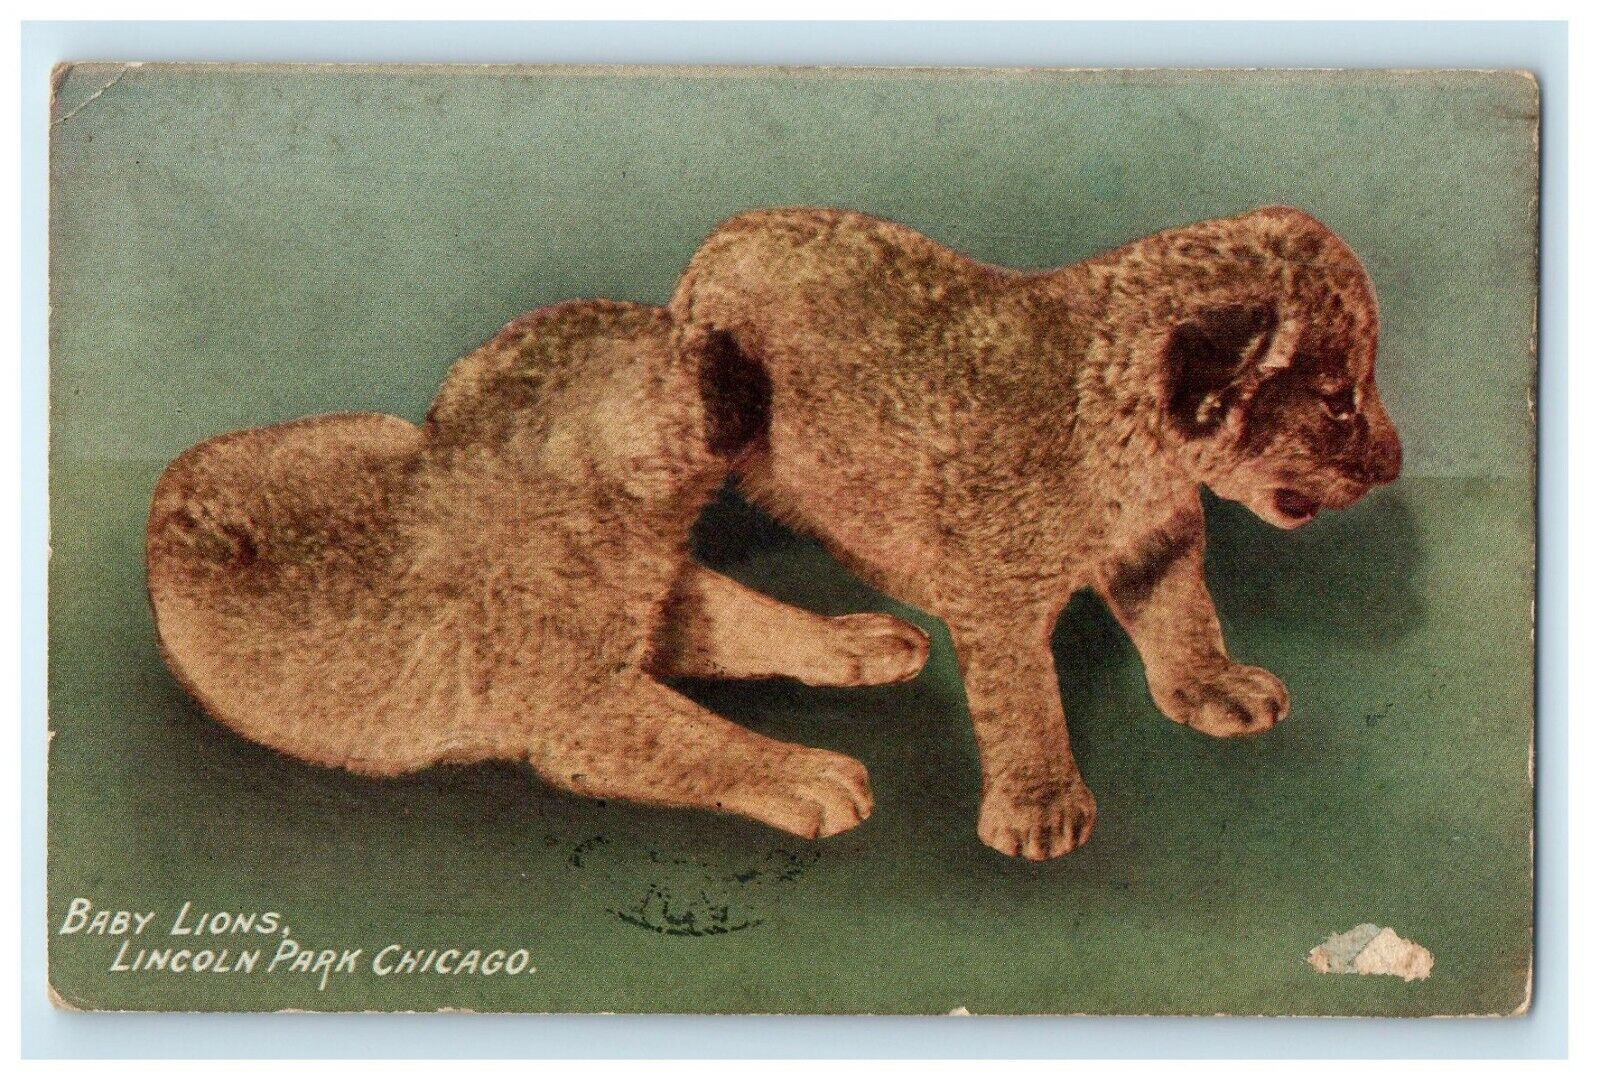 1916 Baby Lions Lincoln Park Chicago Illinois IL Posted Antique Postcard